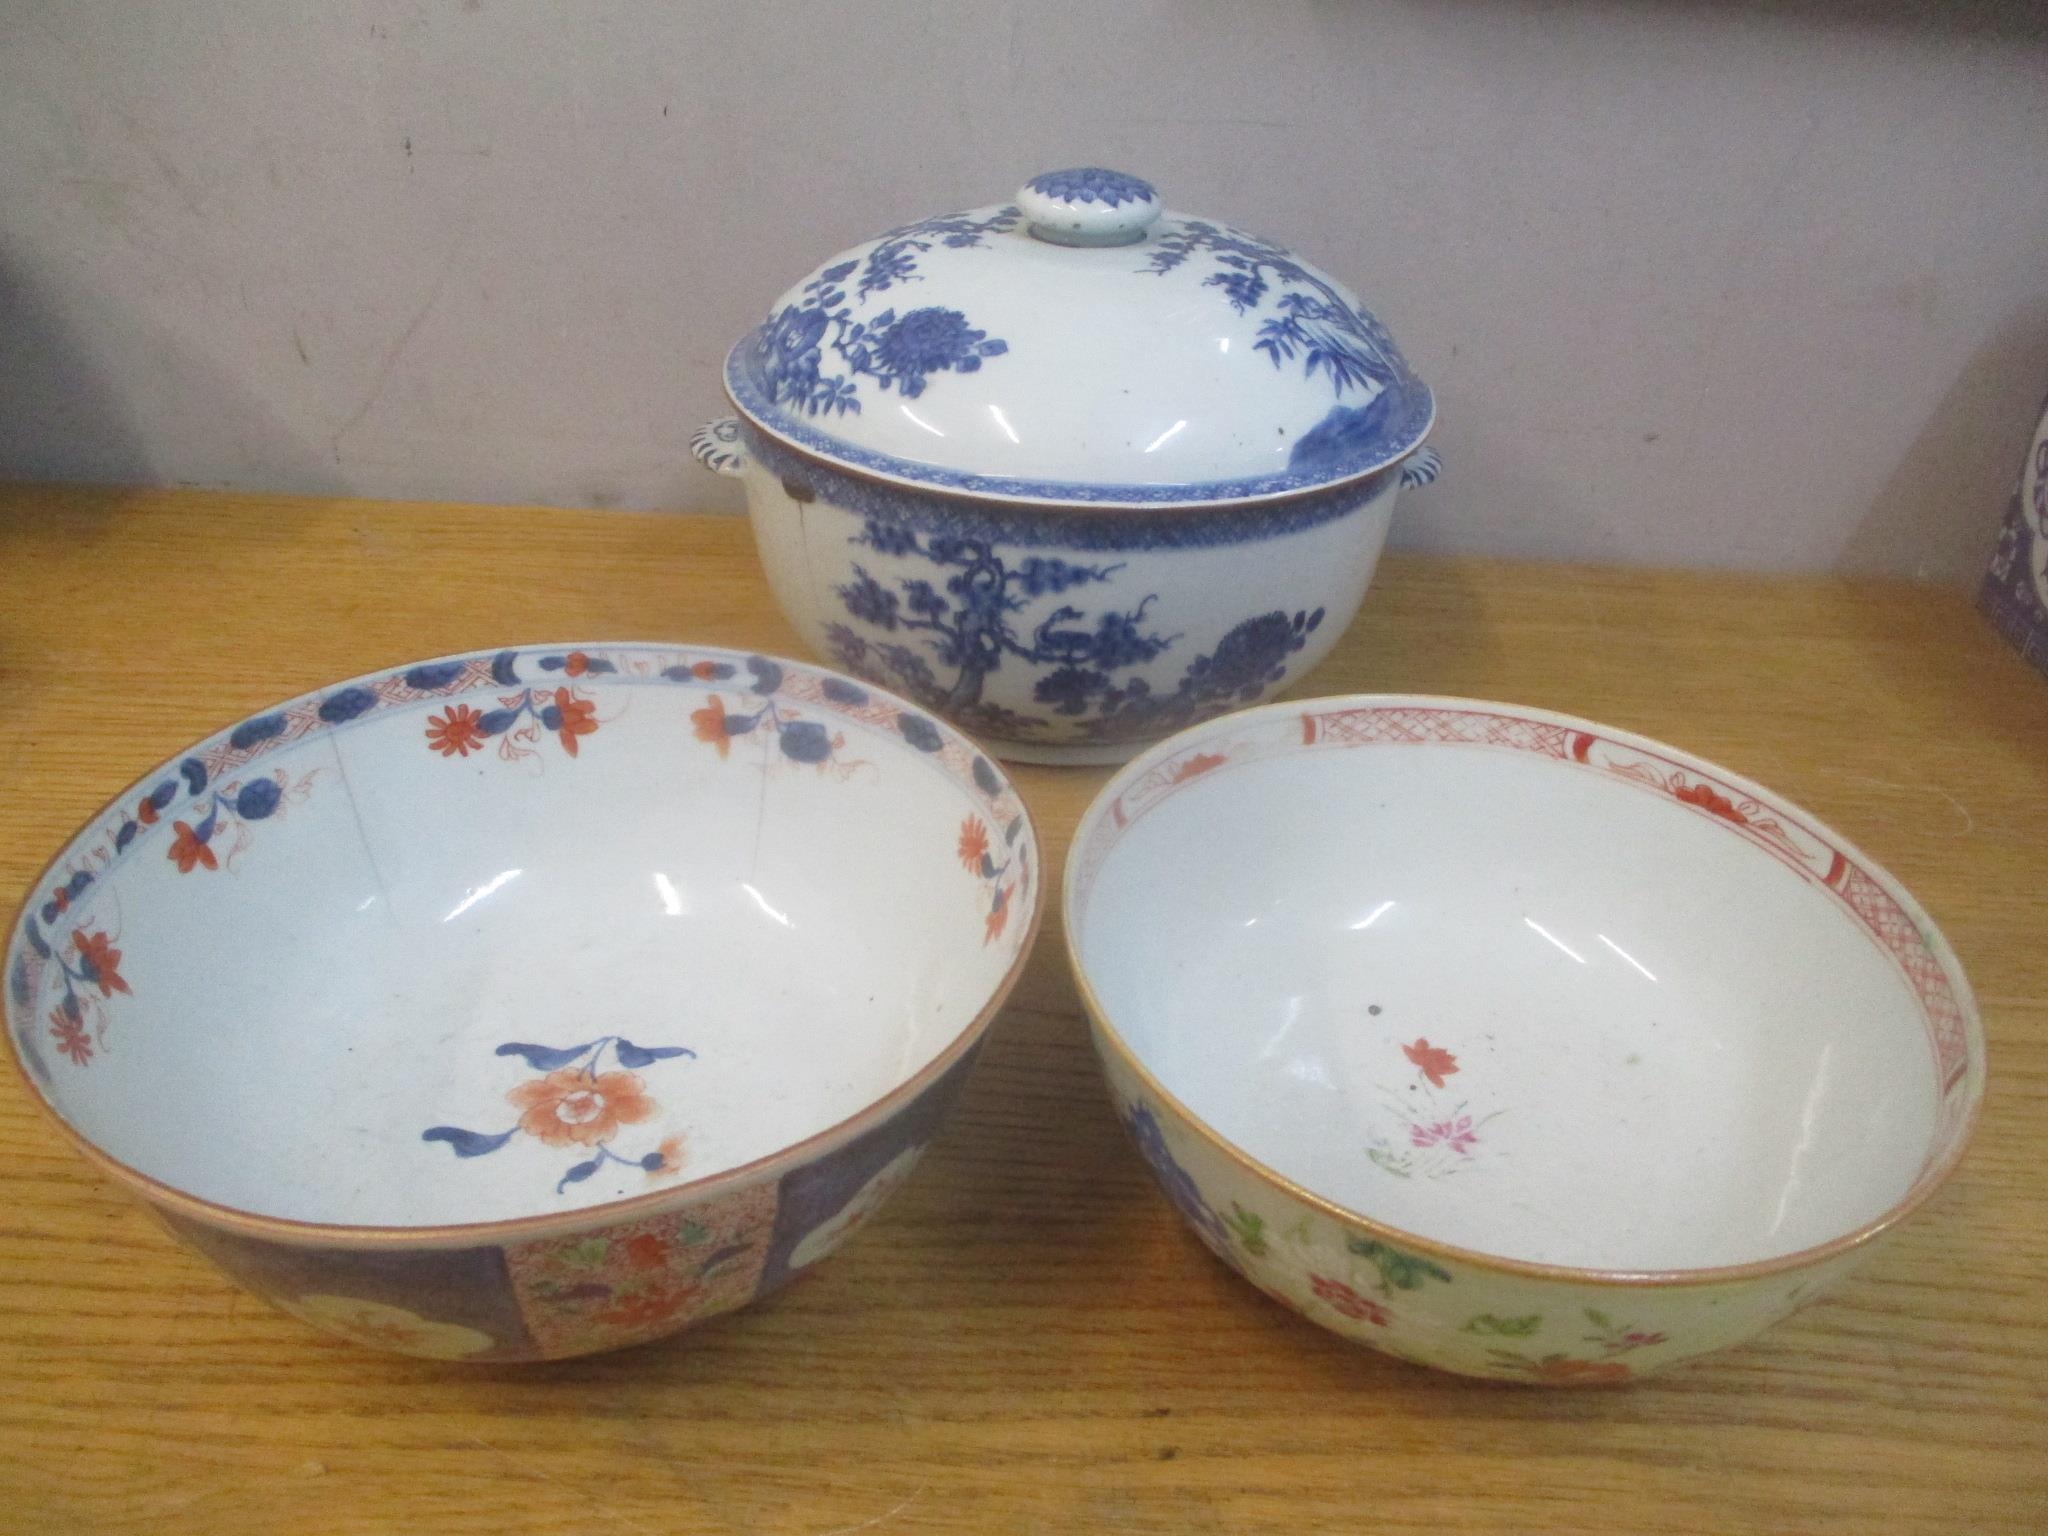 Eighteenth century Chinese porcelain comprising a tureen and cover and two bowls, each damaged